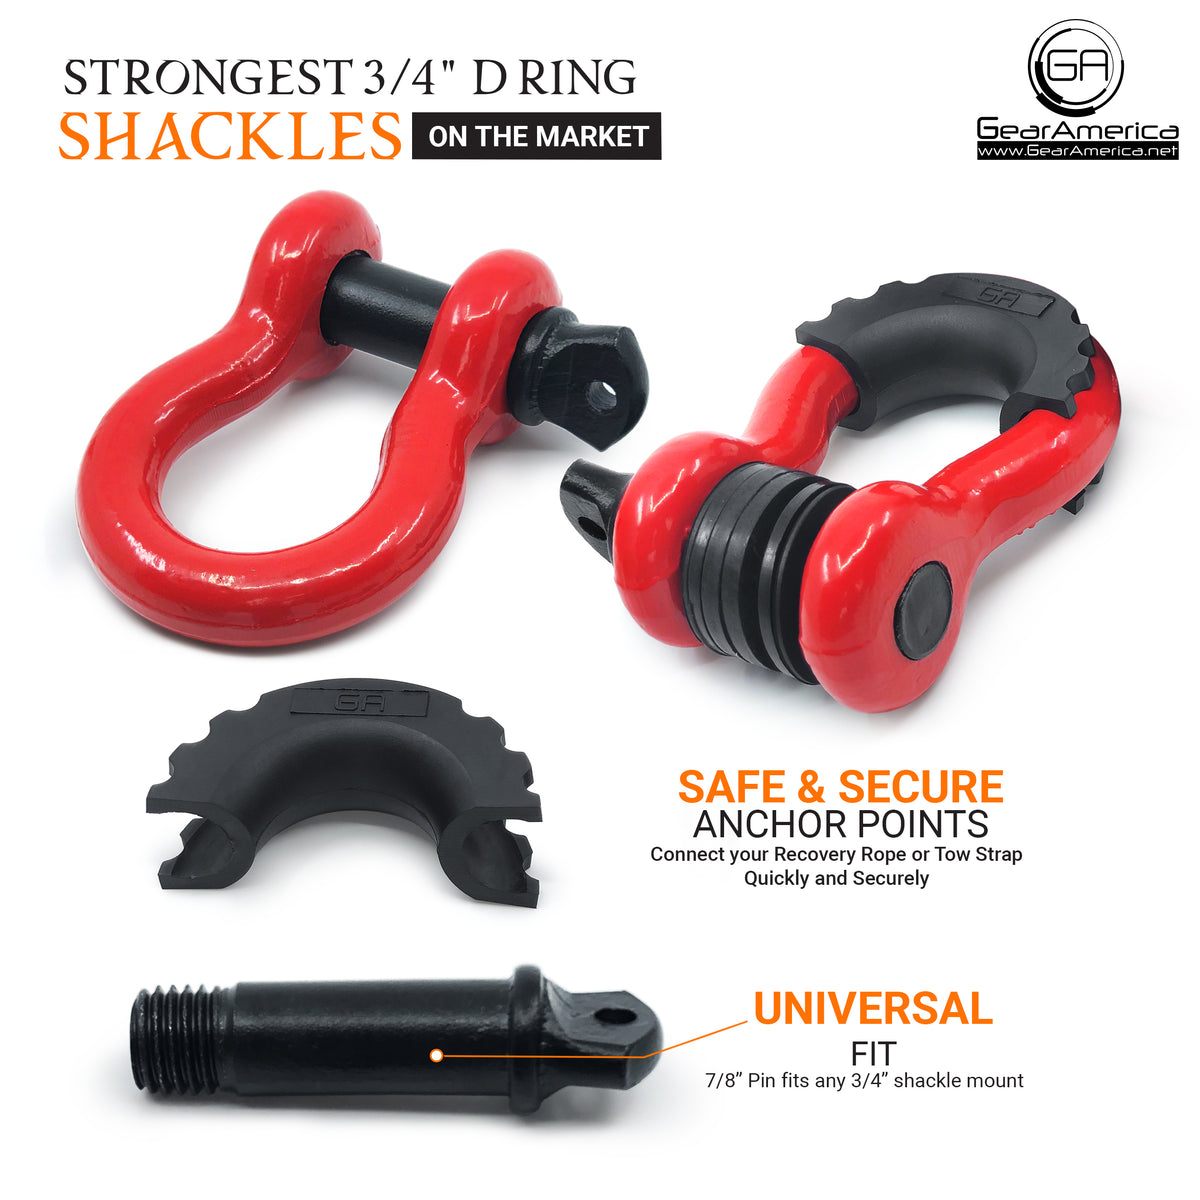 jamgoer 2 Pcs D Ring Shackle 1/2 Off Road Shackles 4409 lbs Small 2 Ton Break Strength Heavy Duty Rugged D-Ring with Clevis Pin for Vehicle Recovery Battery Marine Automotive RV Car Truck 